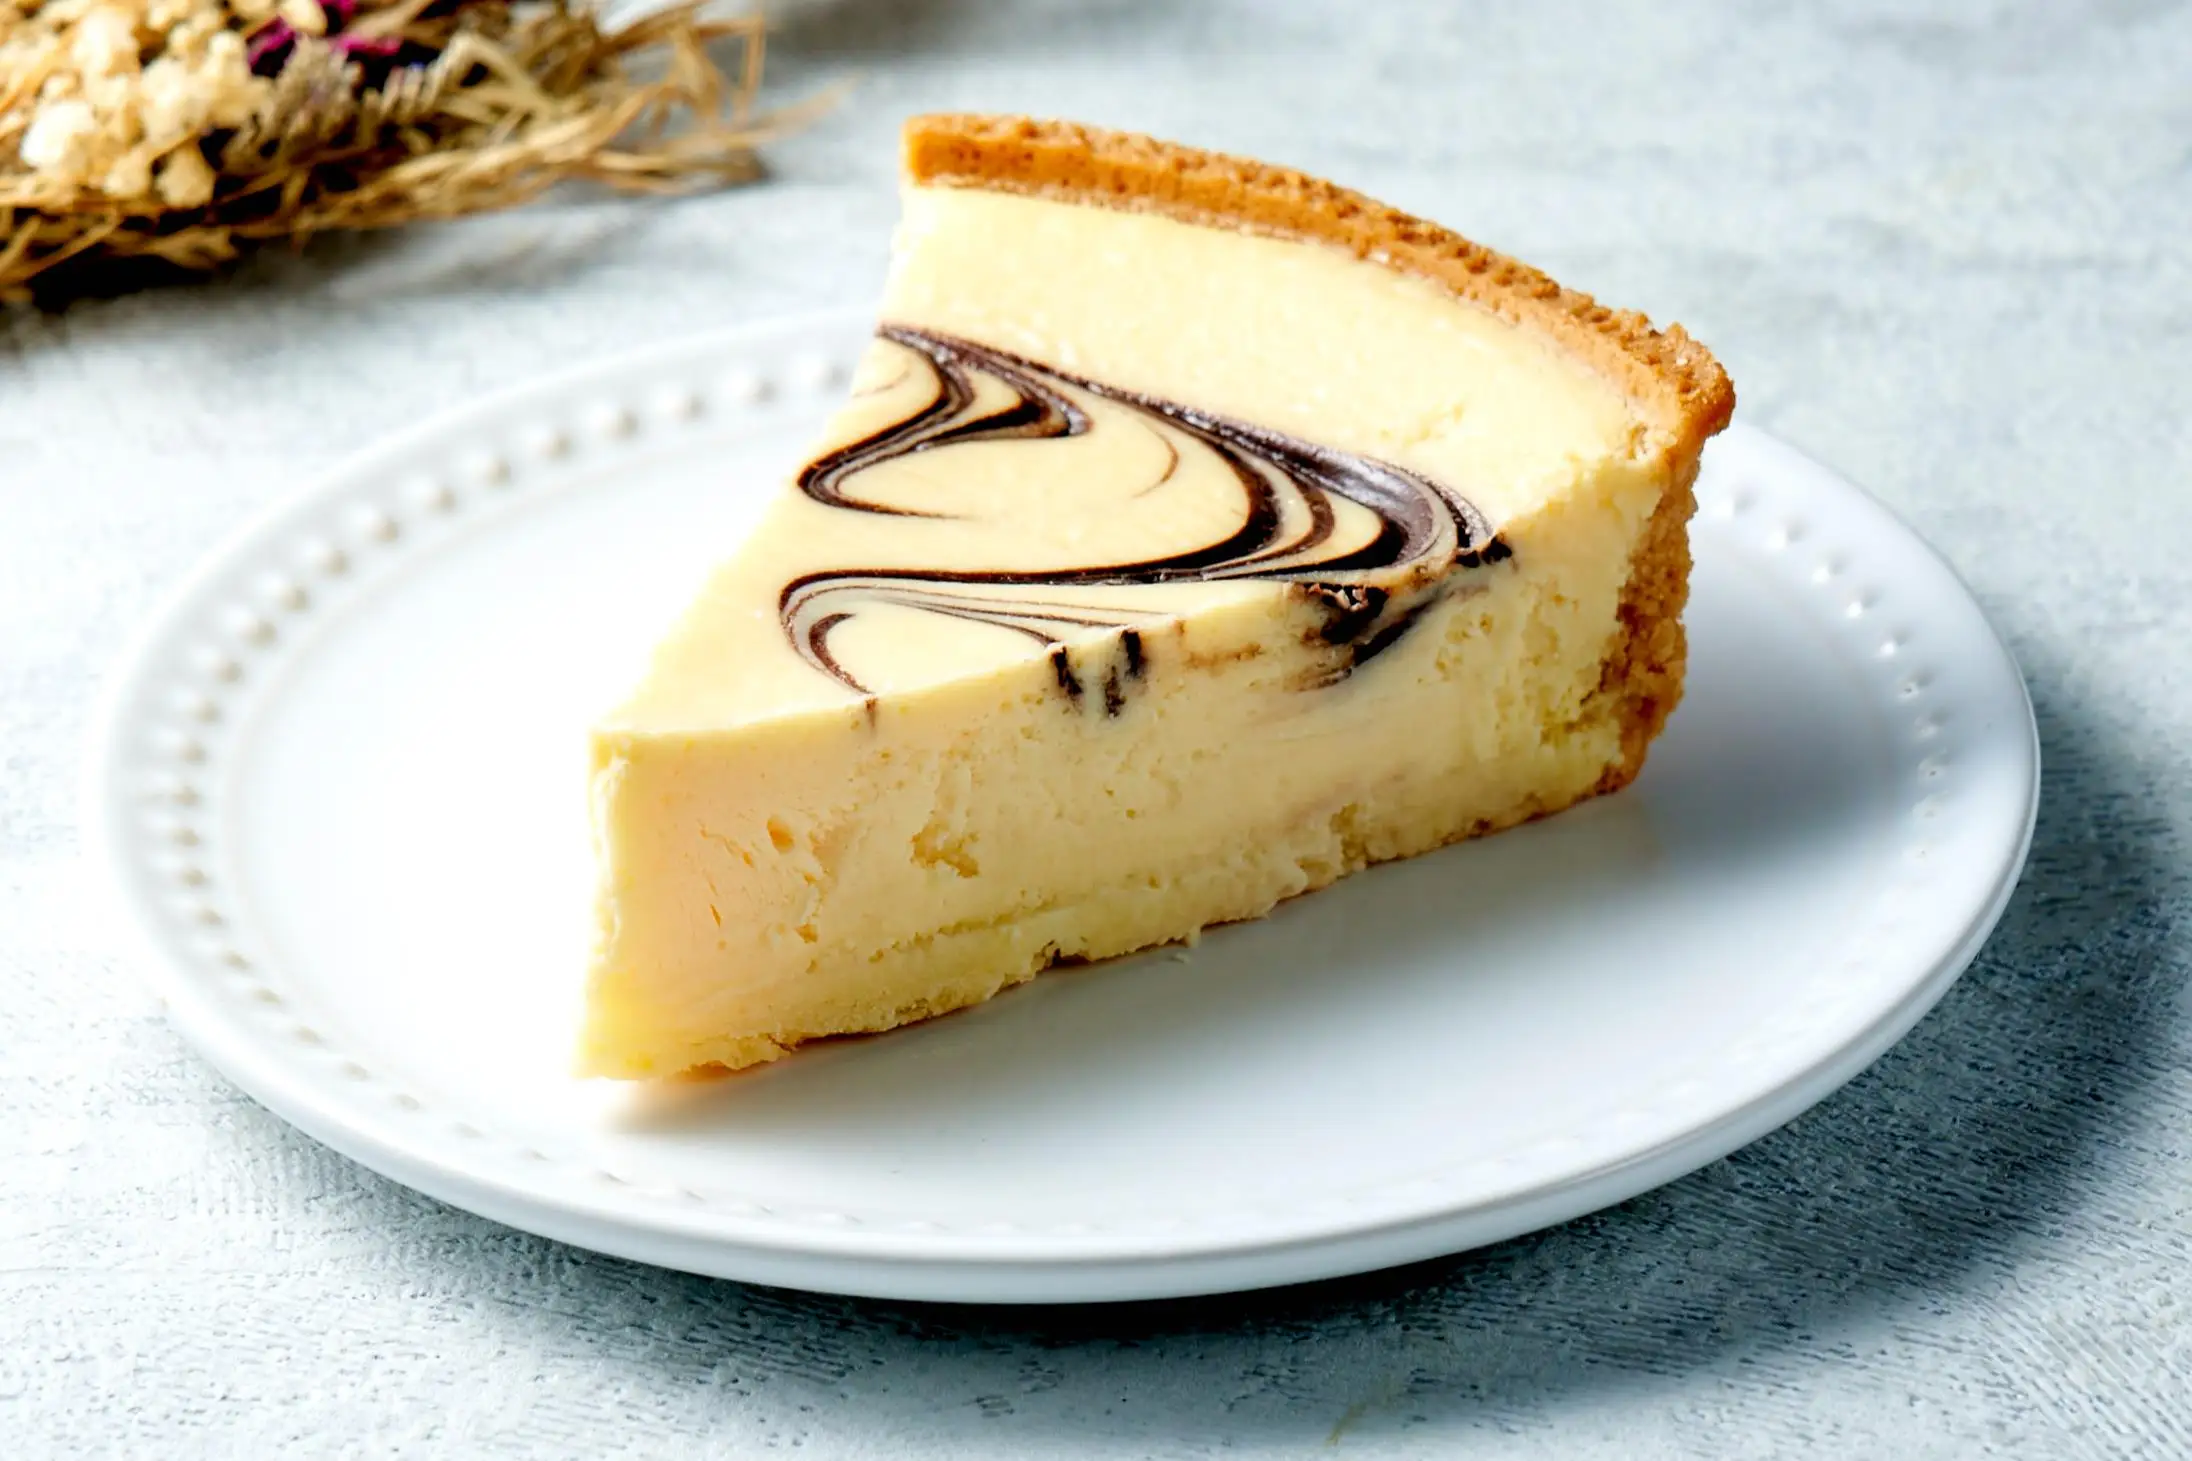 Marble Baked Cheesecake